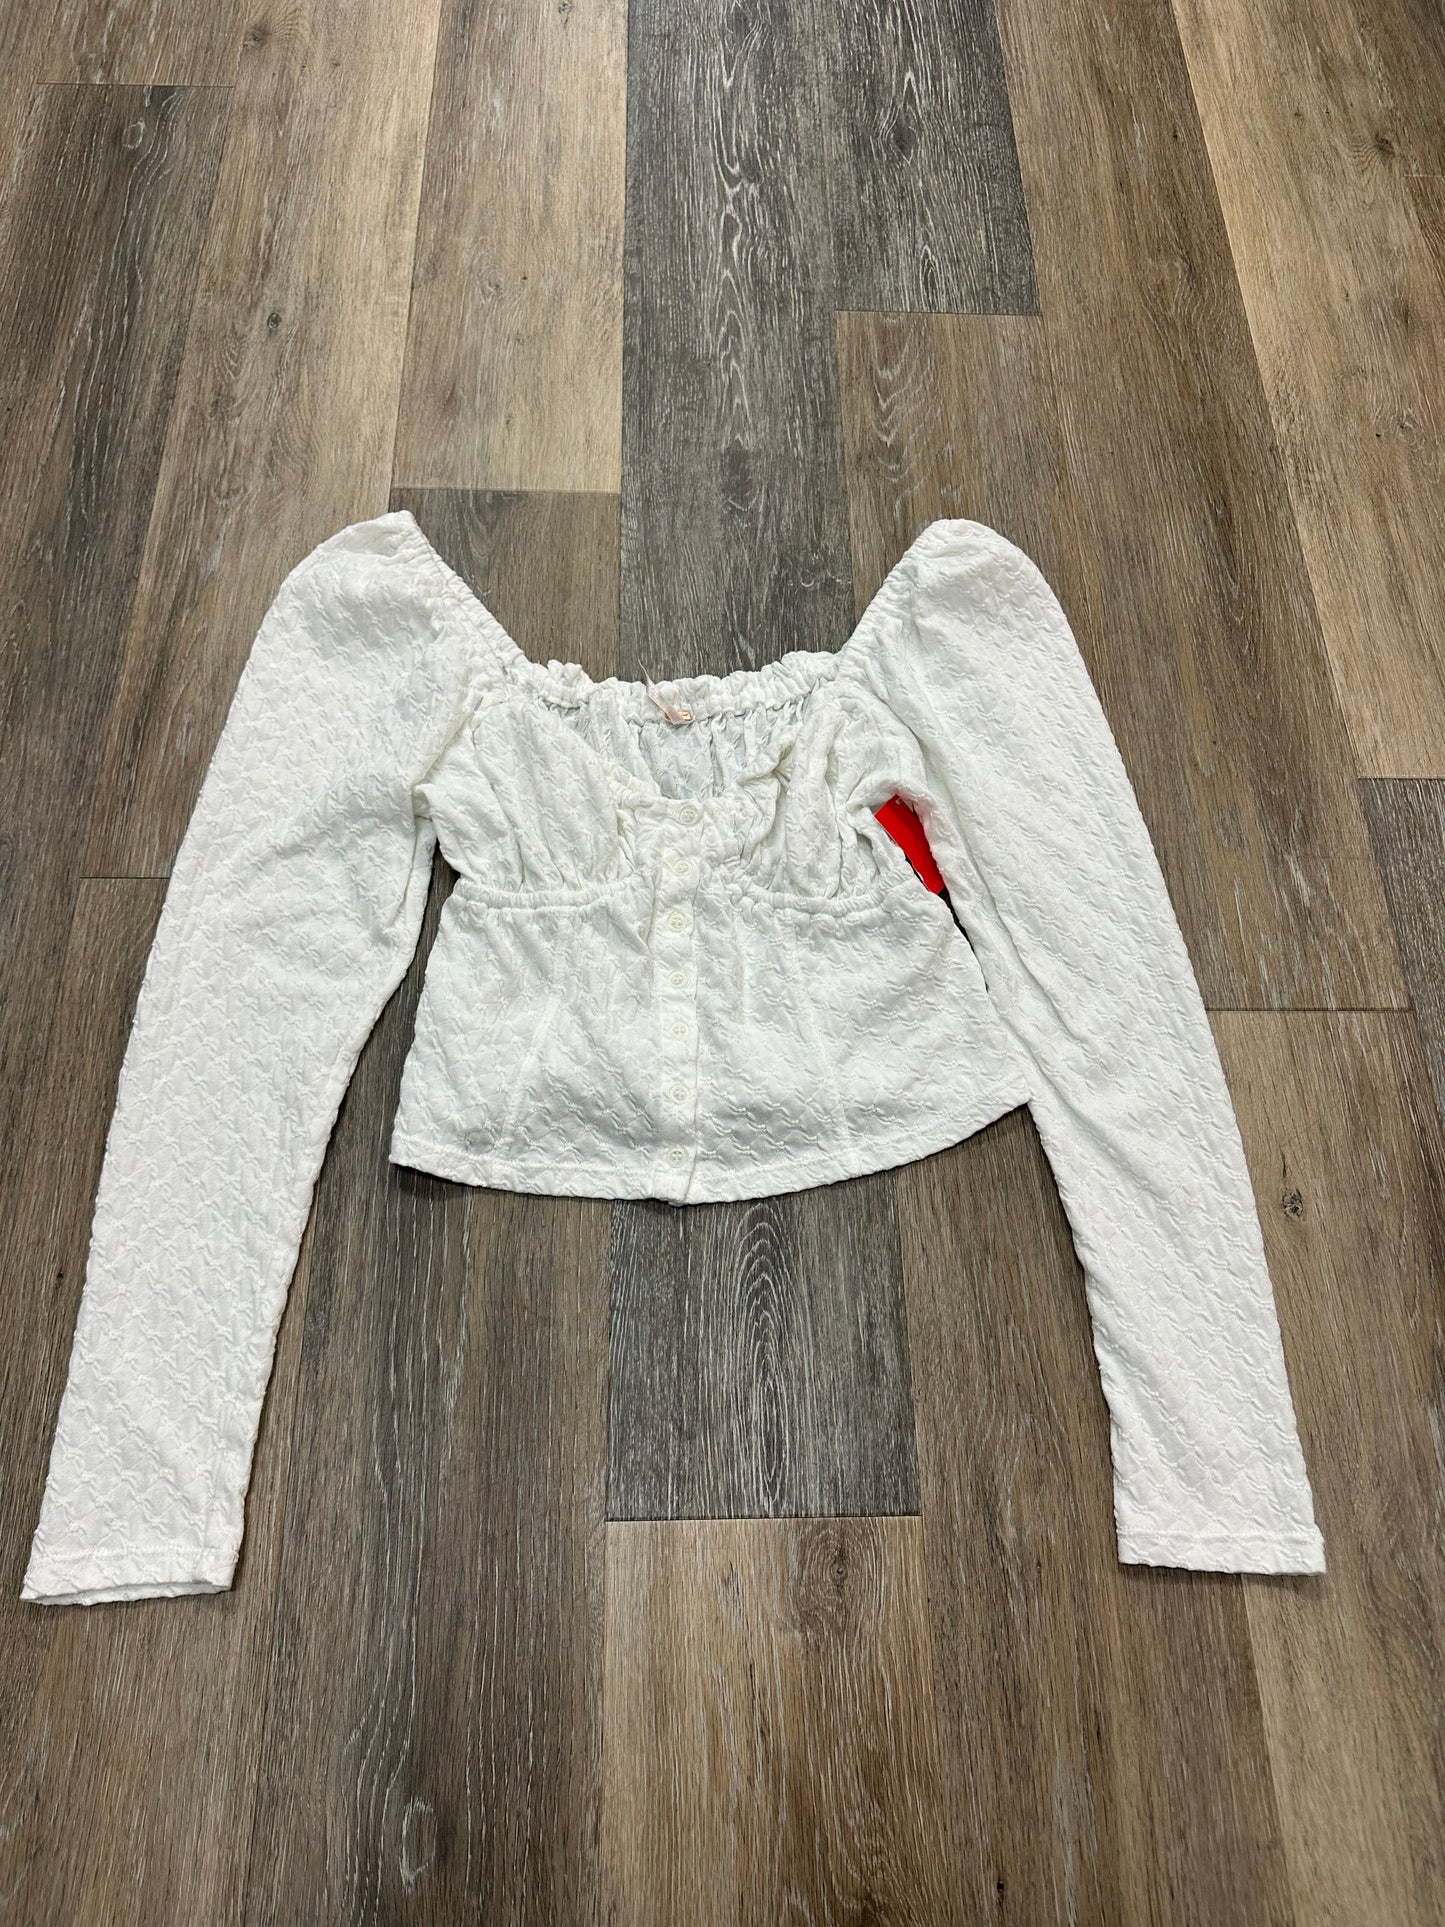 White Blouse Long Sleeve Free People, Size M